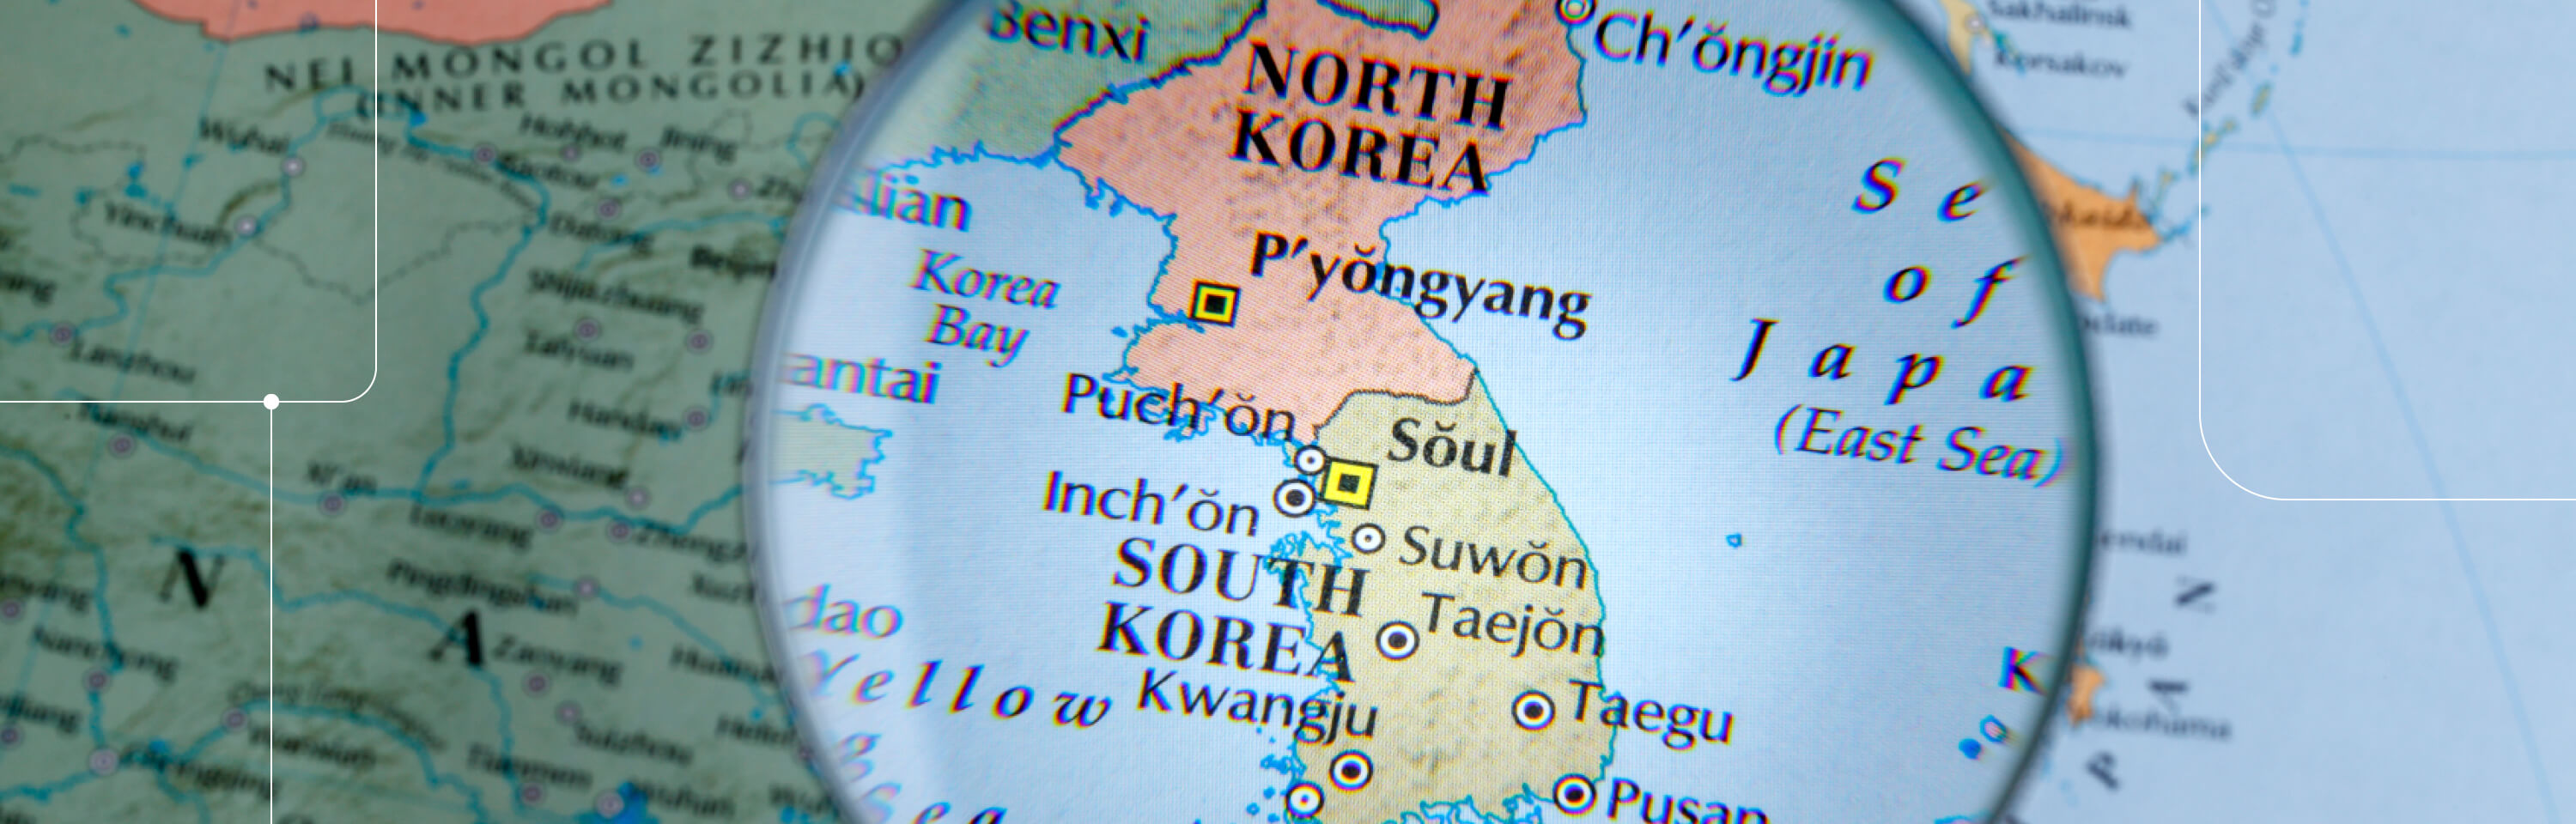 Map with a magnifying glass over North and South Korea